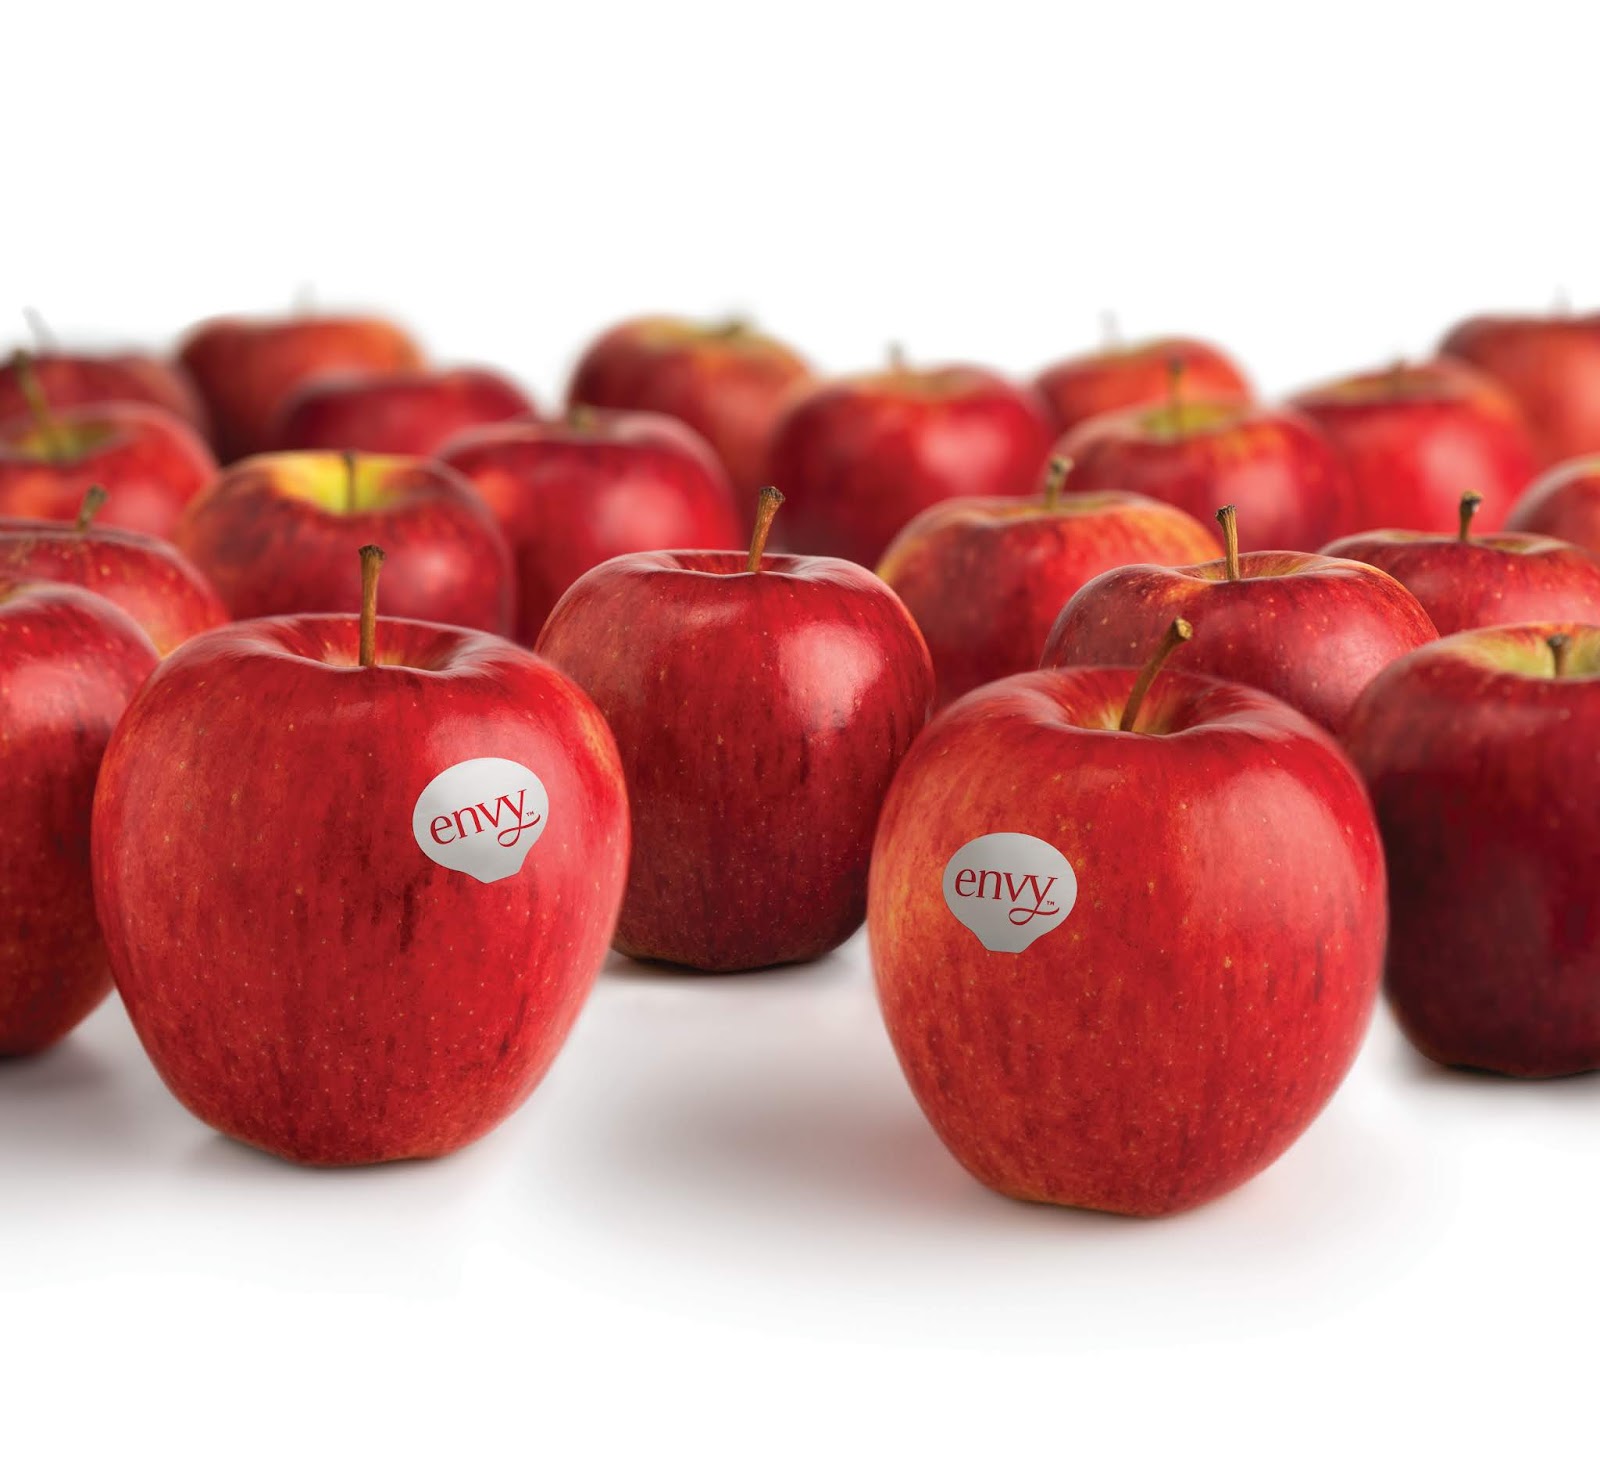 Visit Central Market for a Cooking Class with Envy Apples! # ...